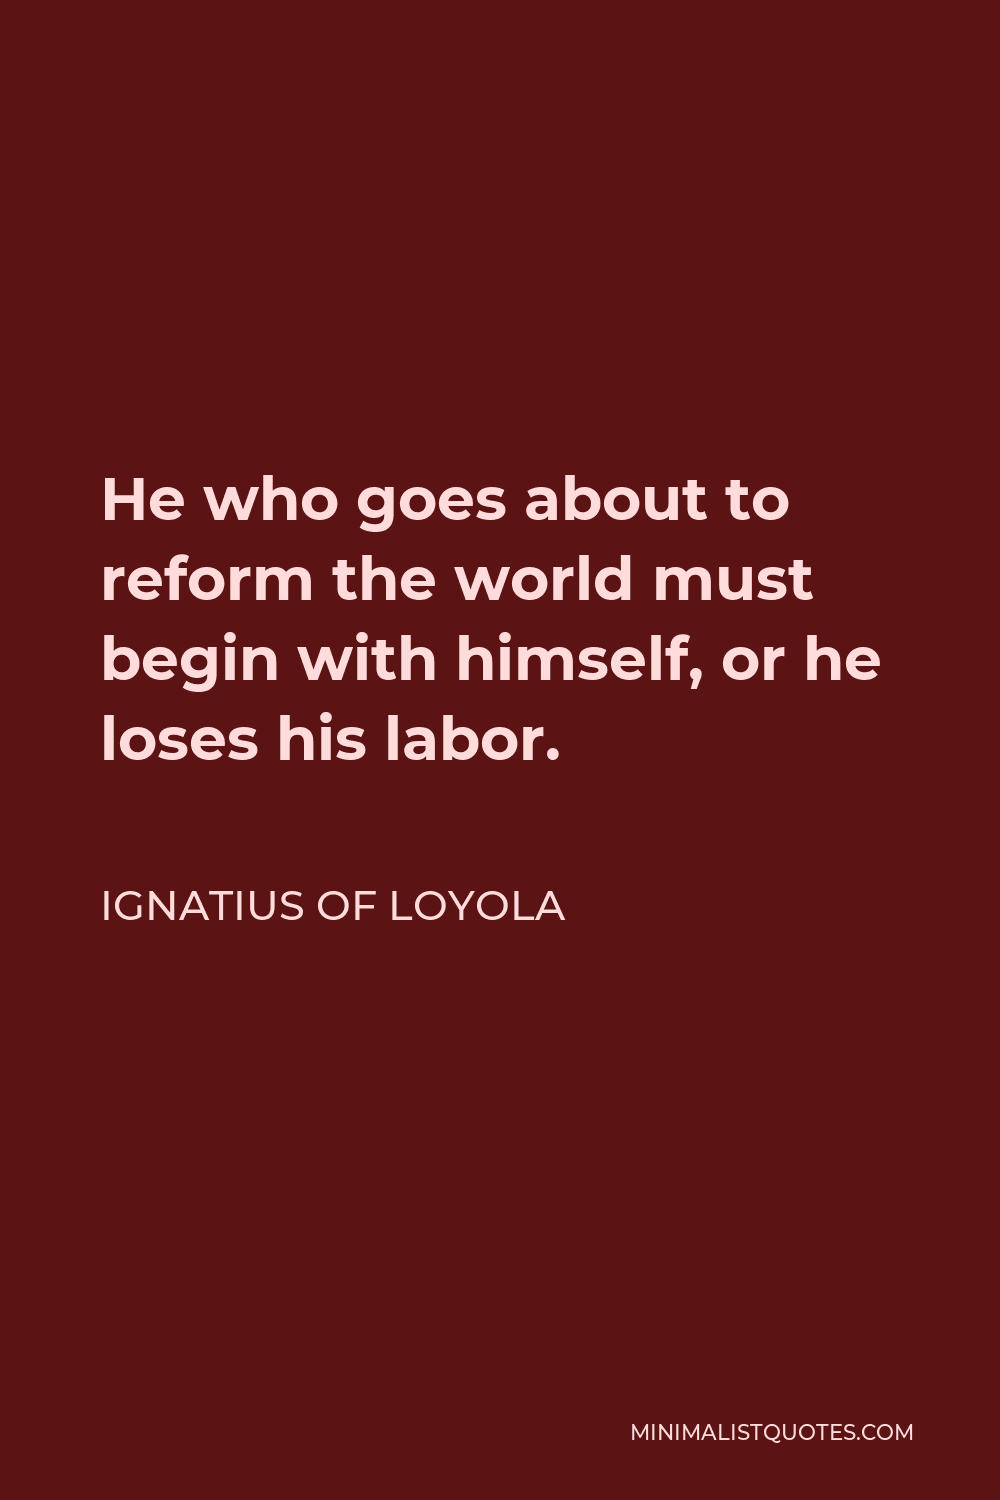 Ignatius of Loyola Quote - He who goes about to reform the world must begin with himself, or he loses his labor.